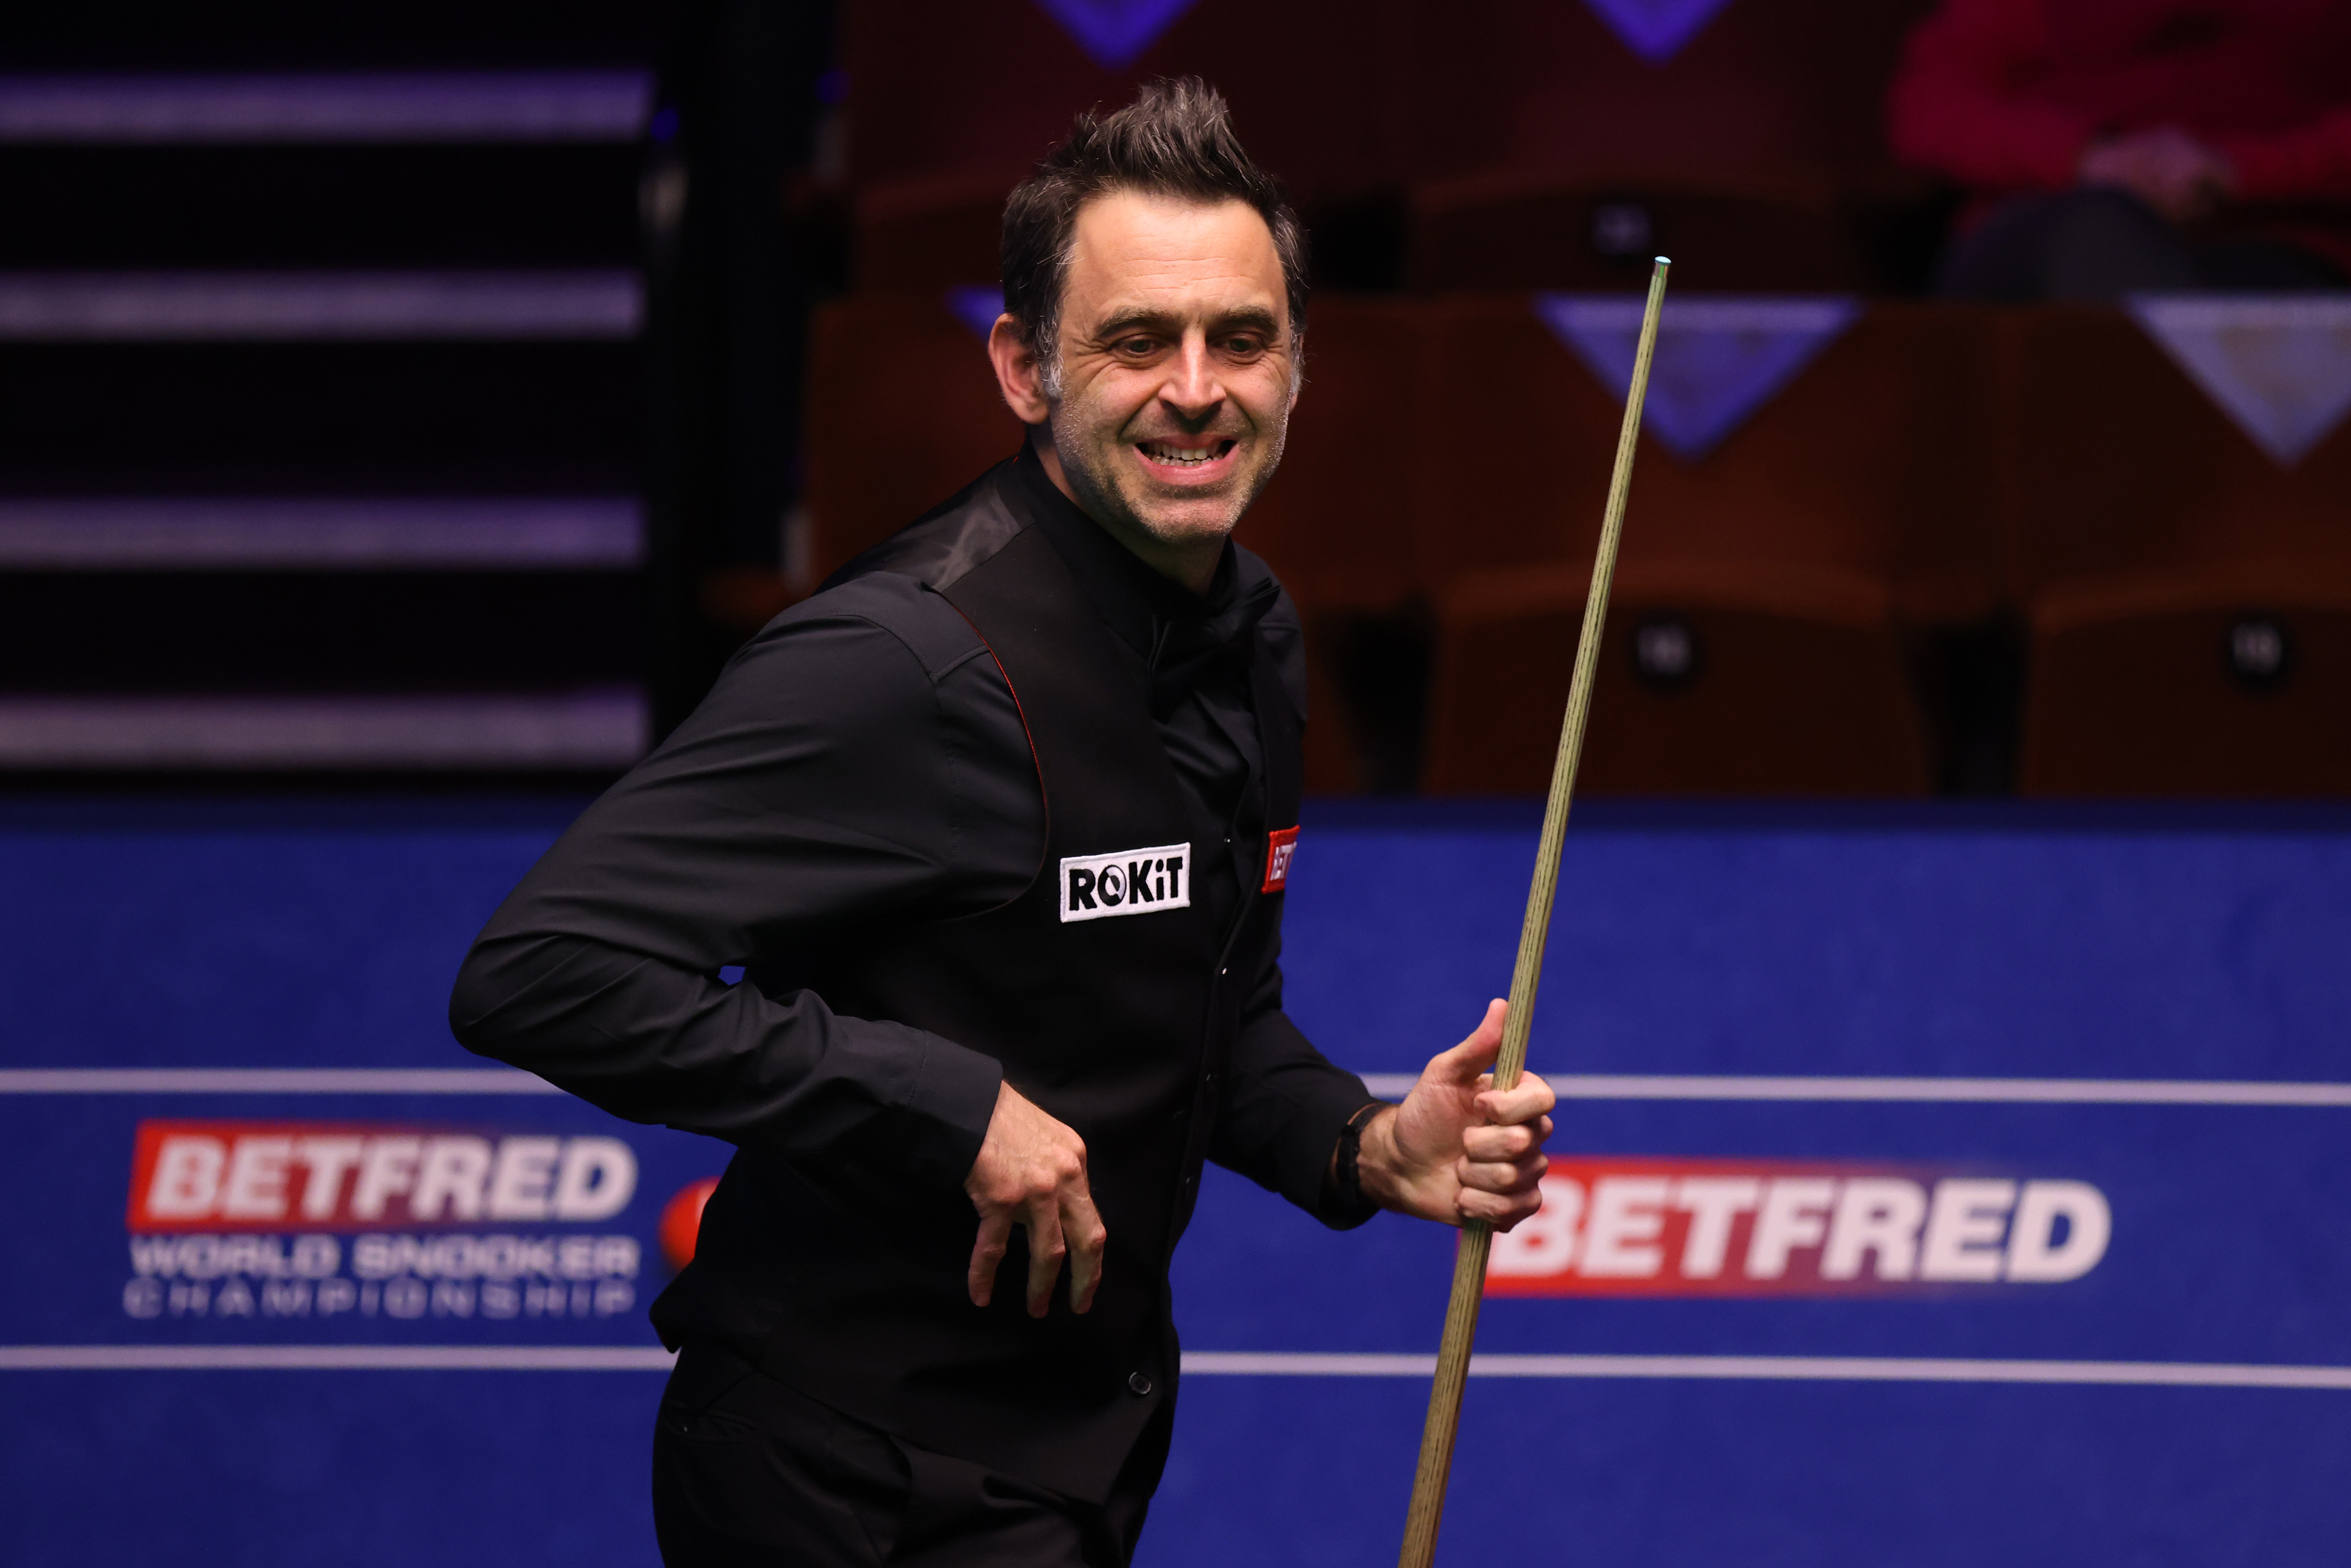 Champion of Champions 2021 how to watch snooker tournament on TV